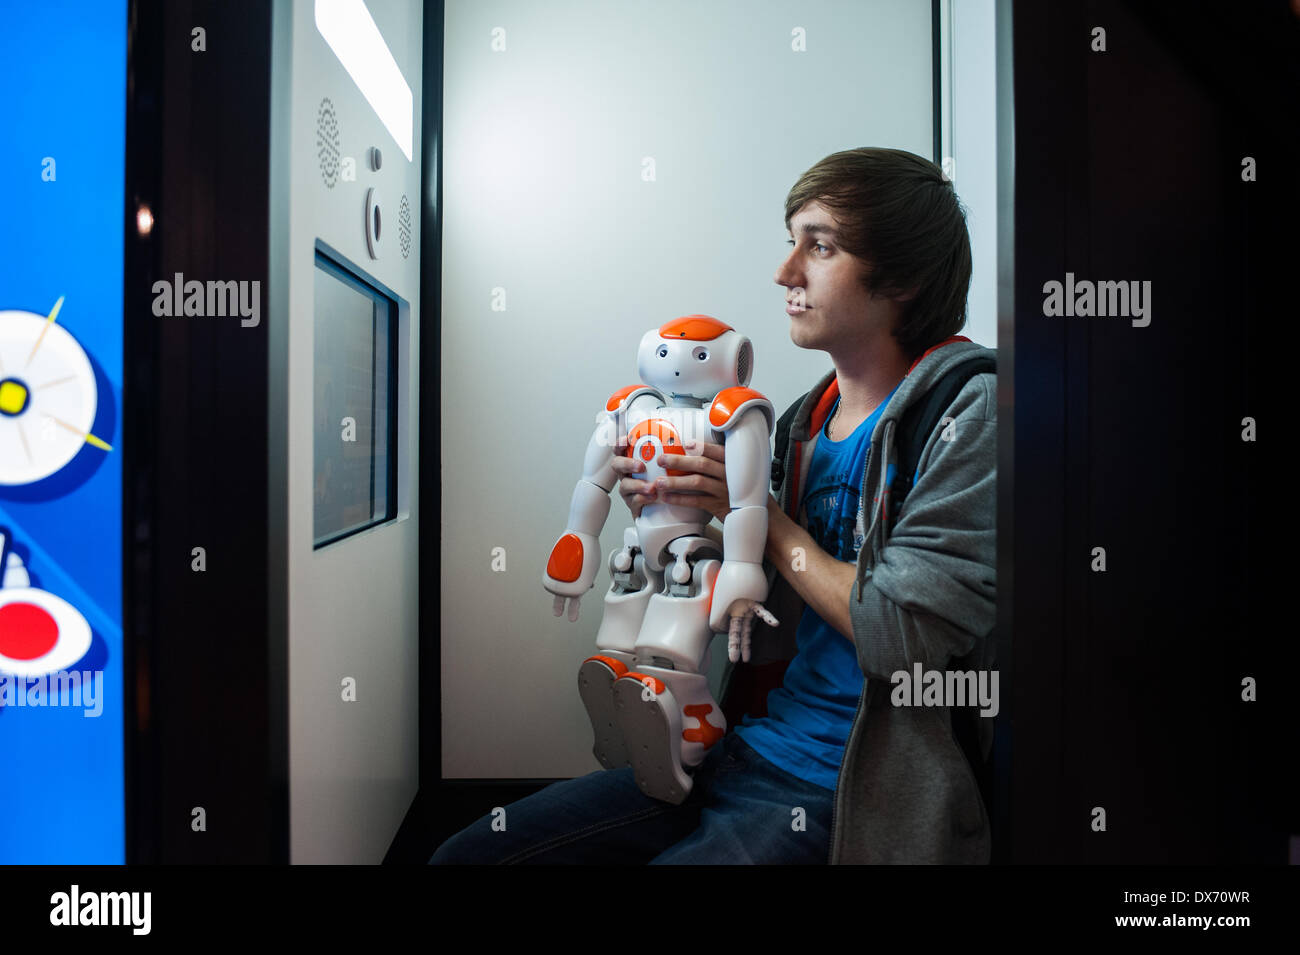 Lyon, France - 19 March 2014: a young man poses for a picture with robot NAO by Aldebaran at Innorobo 2014, the 4th international trade show on service robotics. Credit:  Piero Cruciatti/Alamy Live News Stock Photo